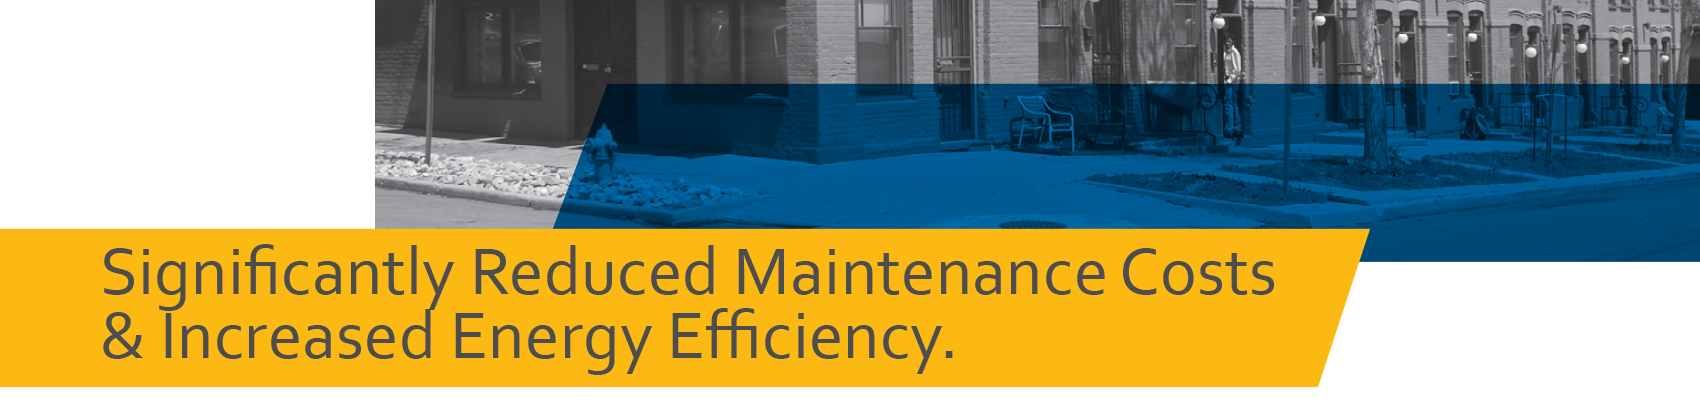 Significantly Reduced Maintenance Costs & Increased Energy Efficiency